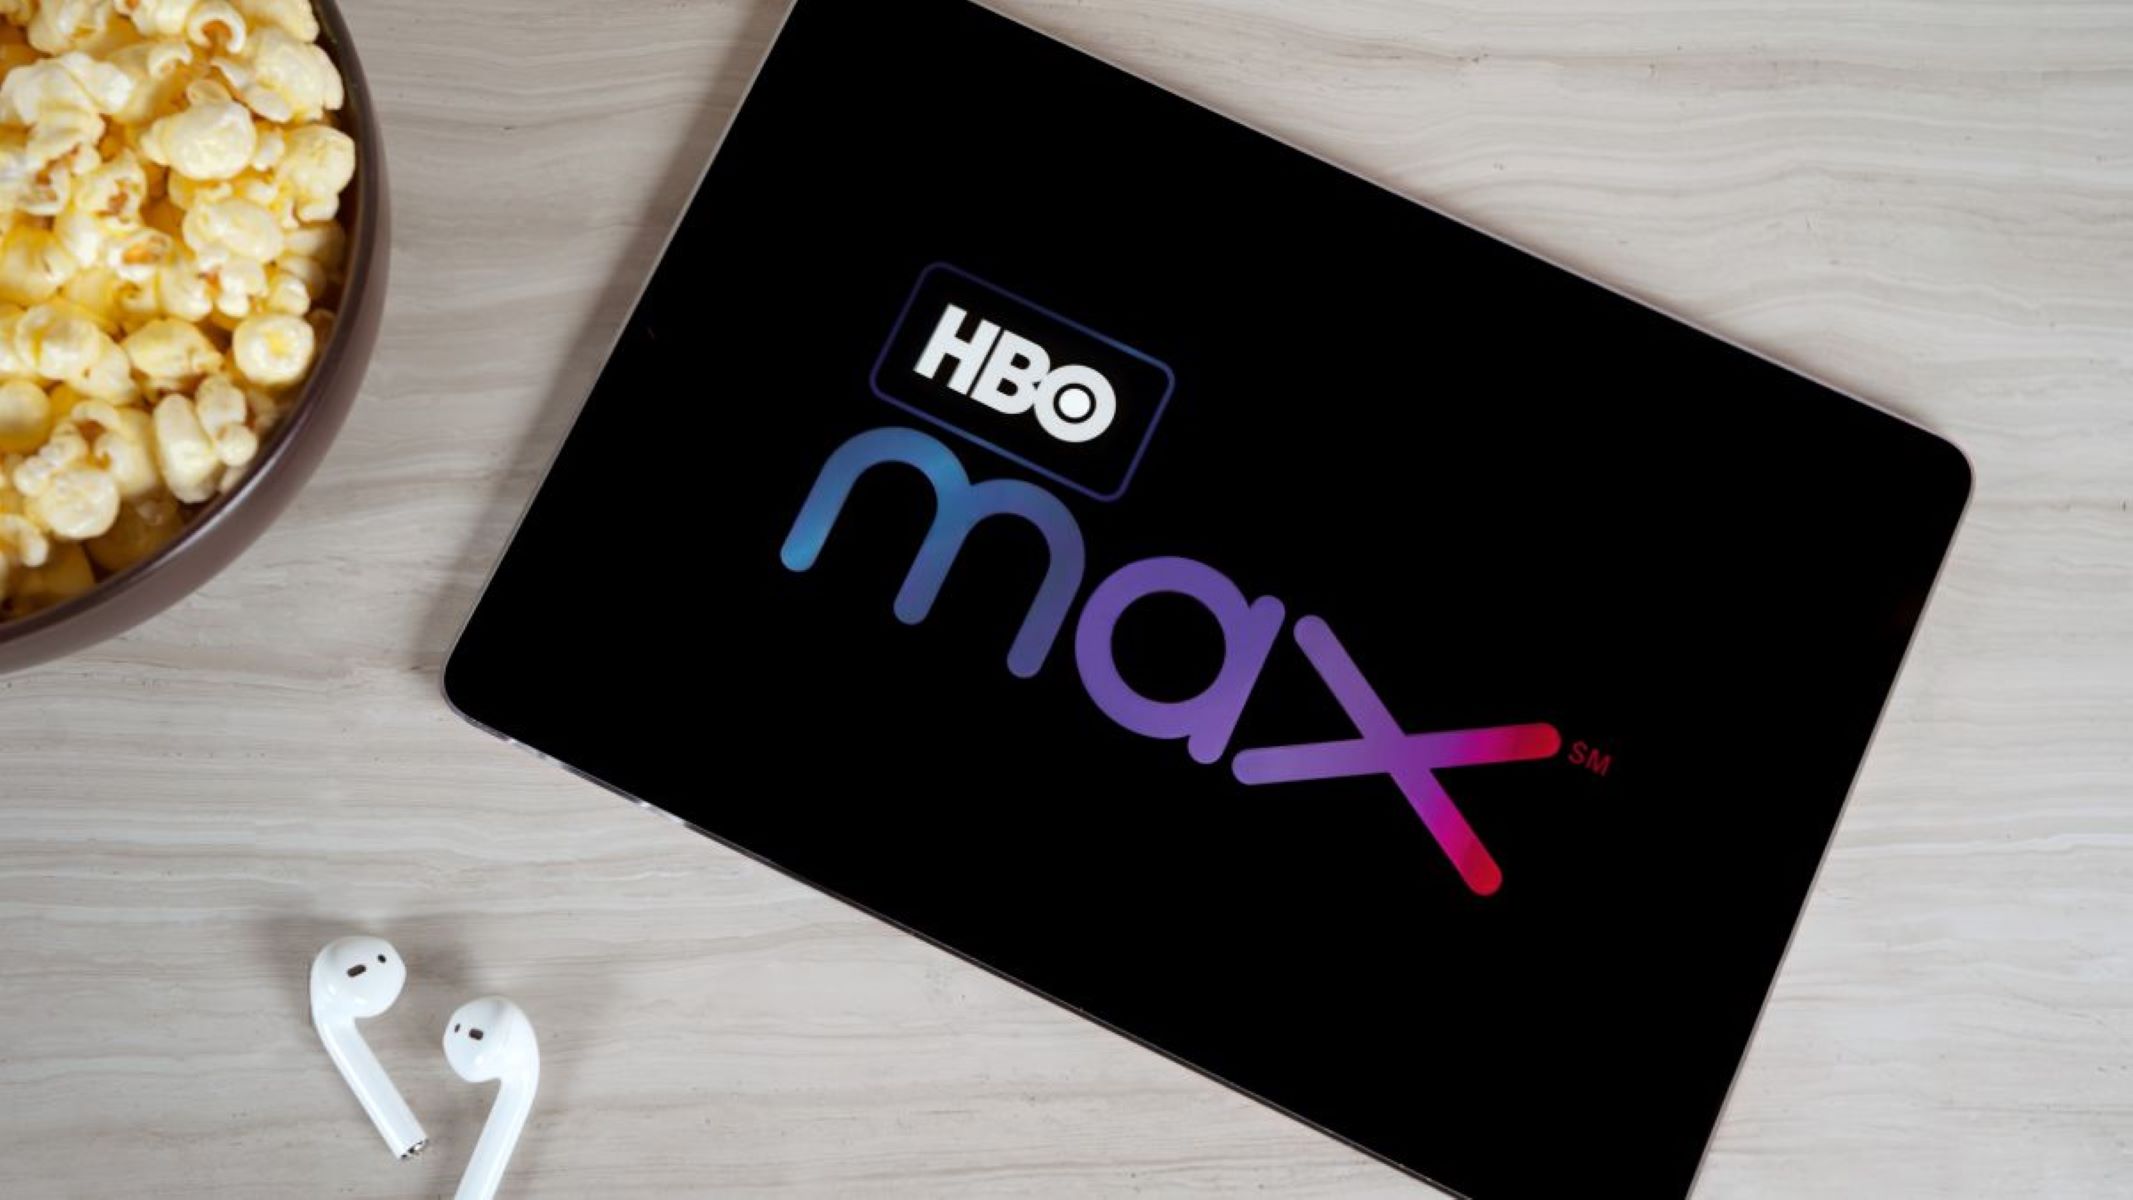 How To Get HBO Max For Free With AT&T